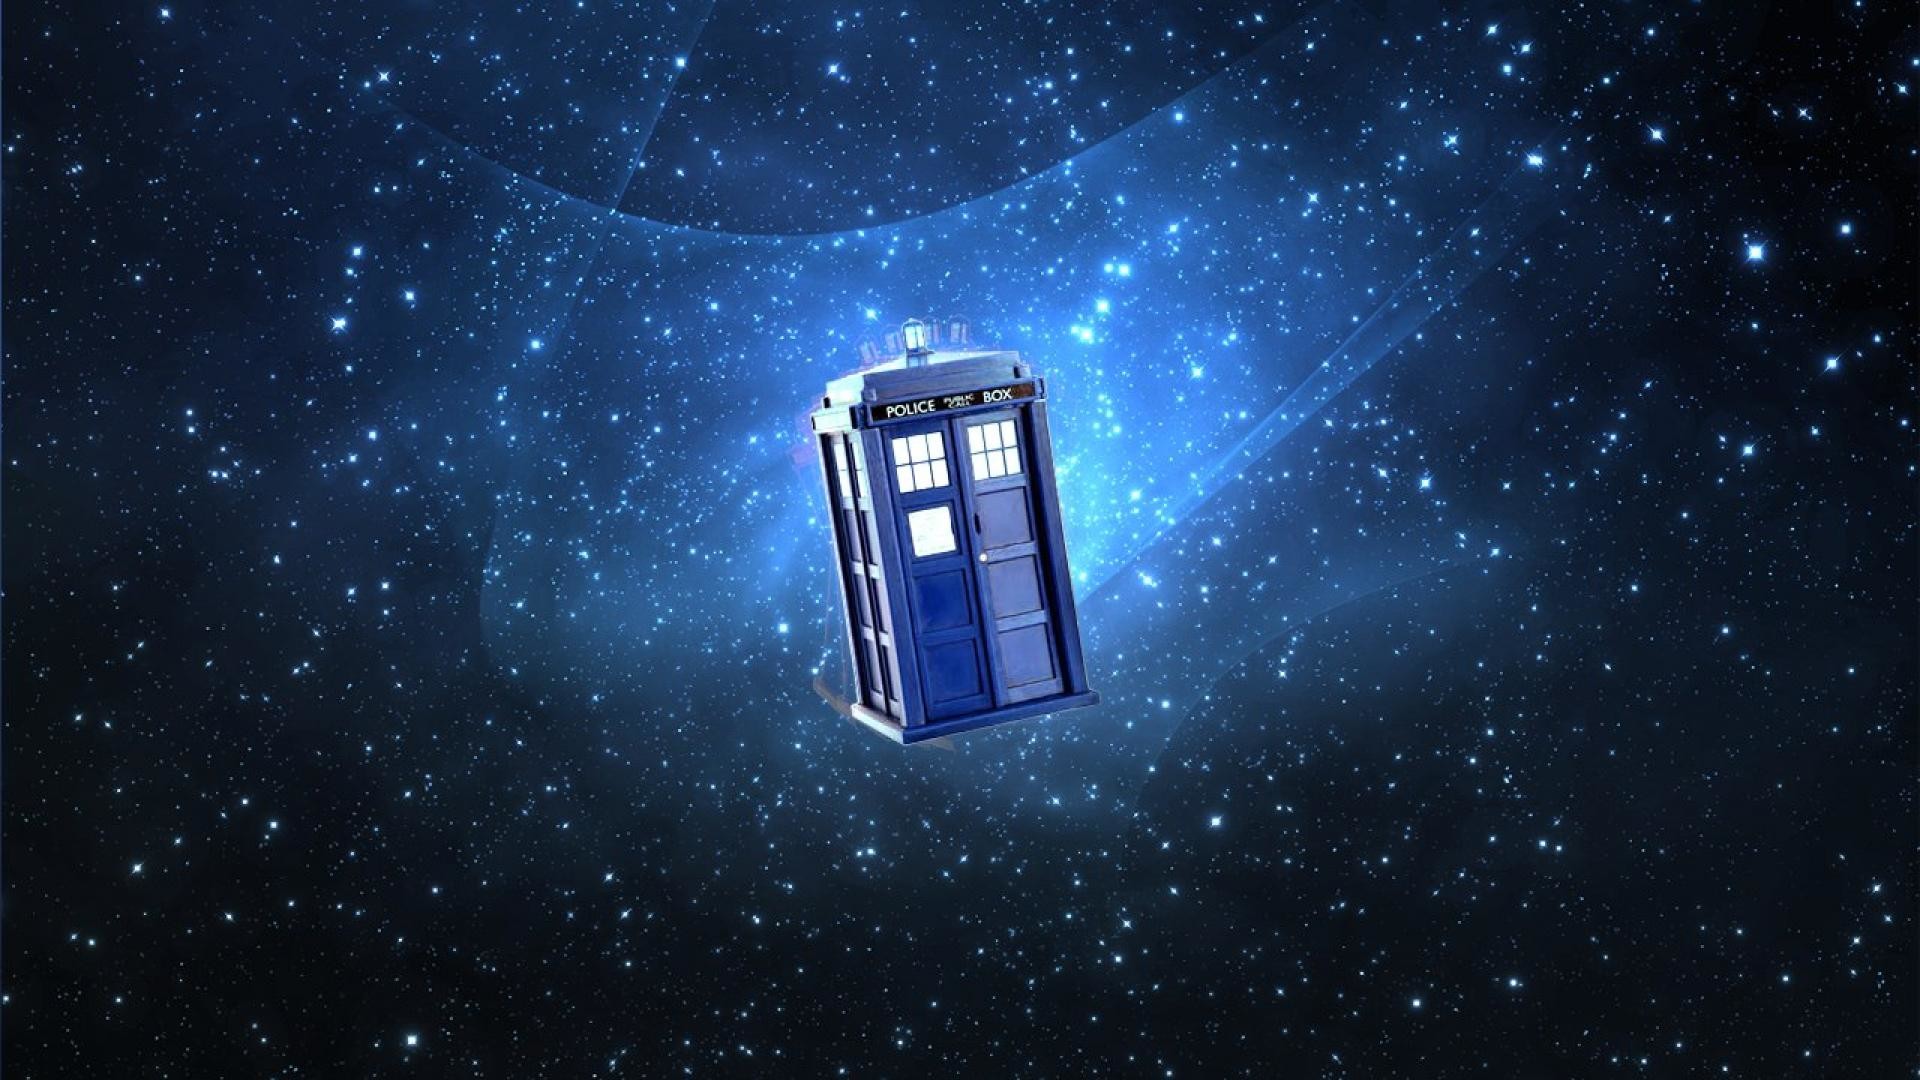 1920x1080 1000+ ideas about Doctor Who Wallpaper on Pinterest - HD Wallpapers